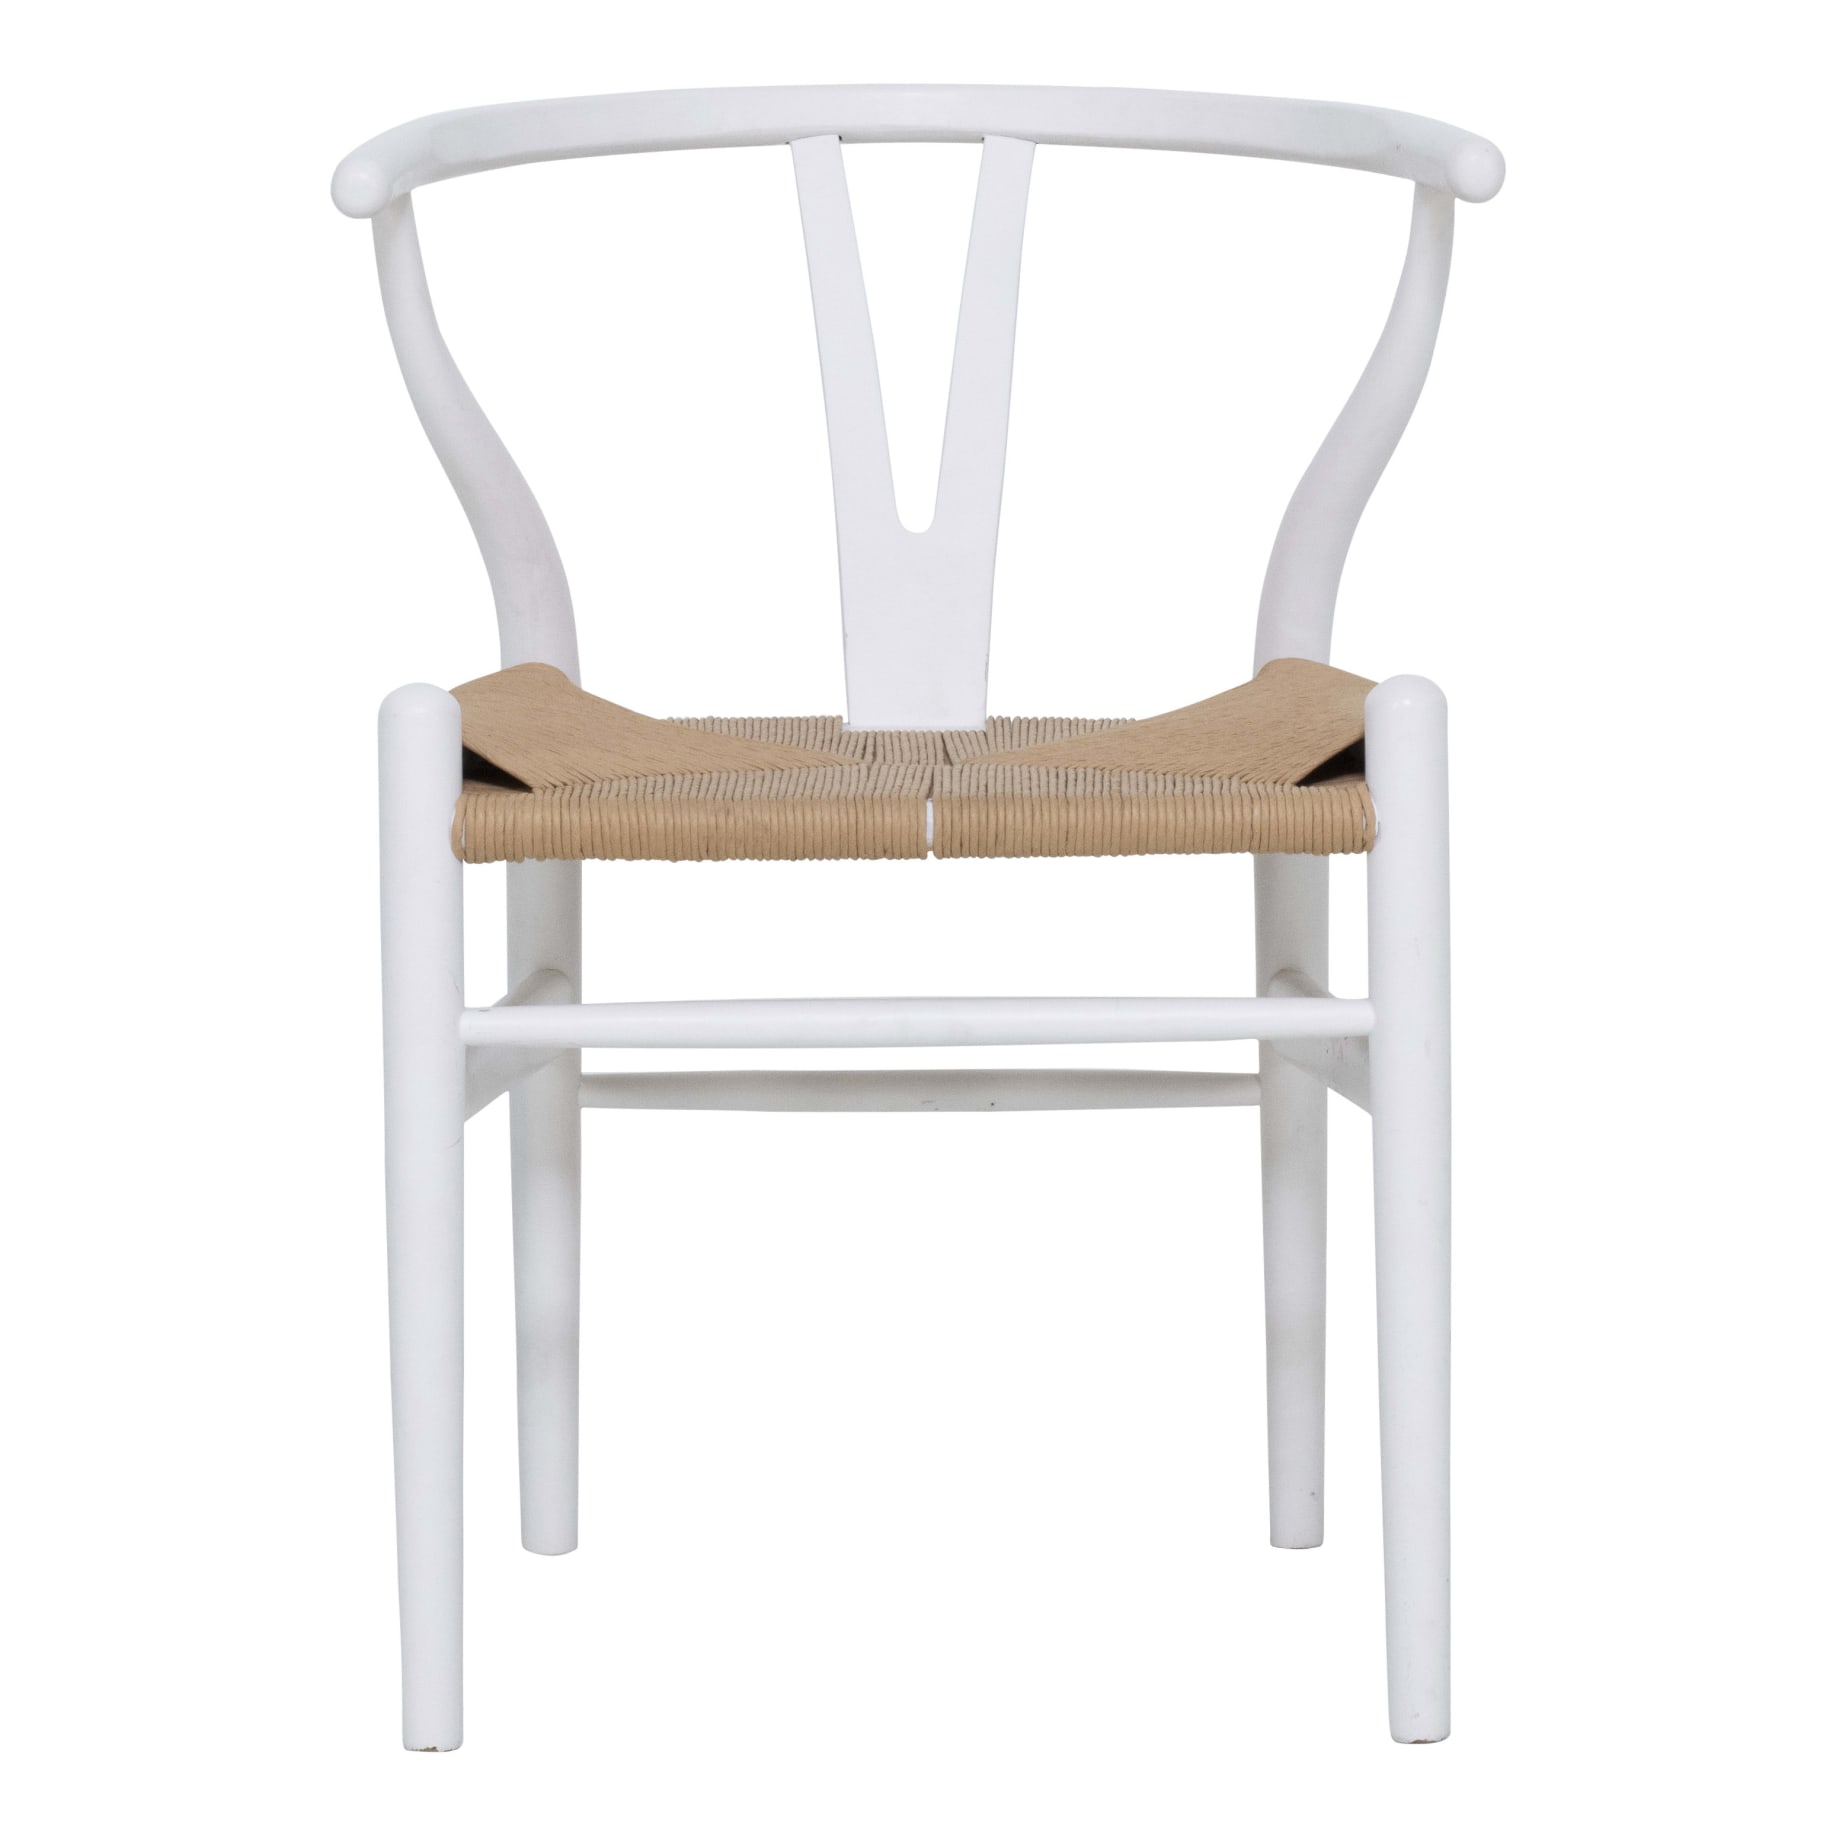 Megs Wishbone Dining Chair in White / Natural Seat